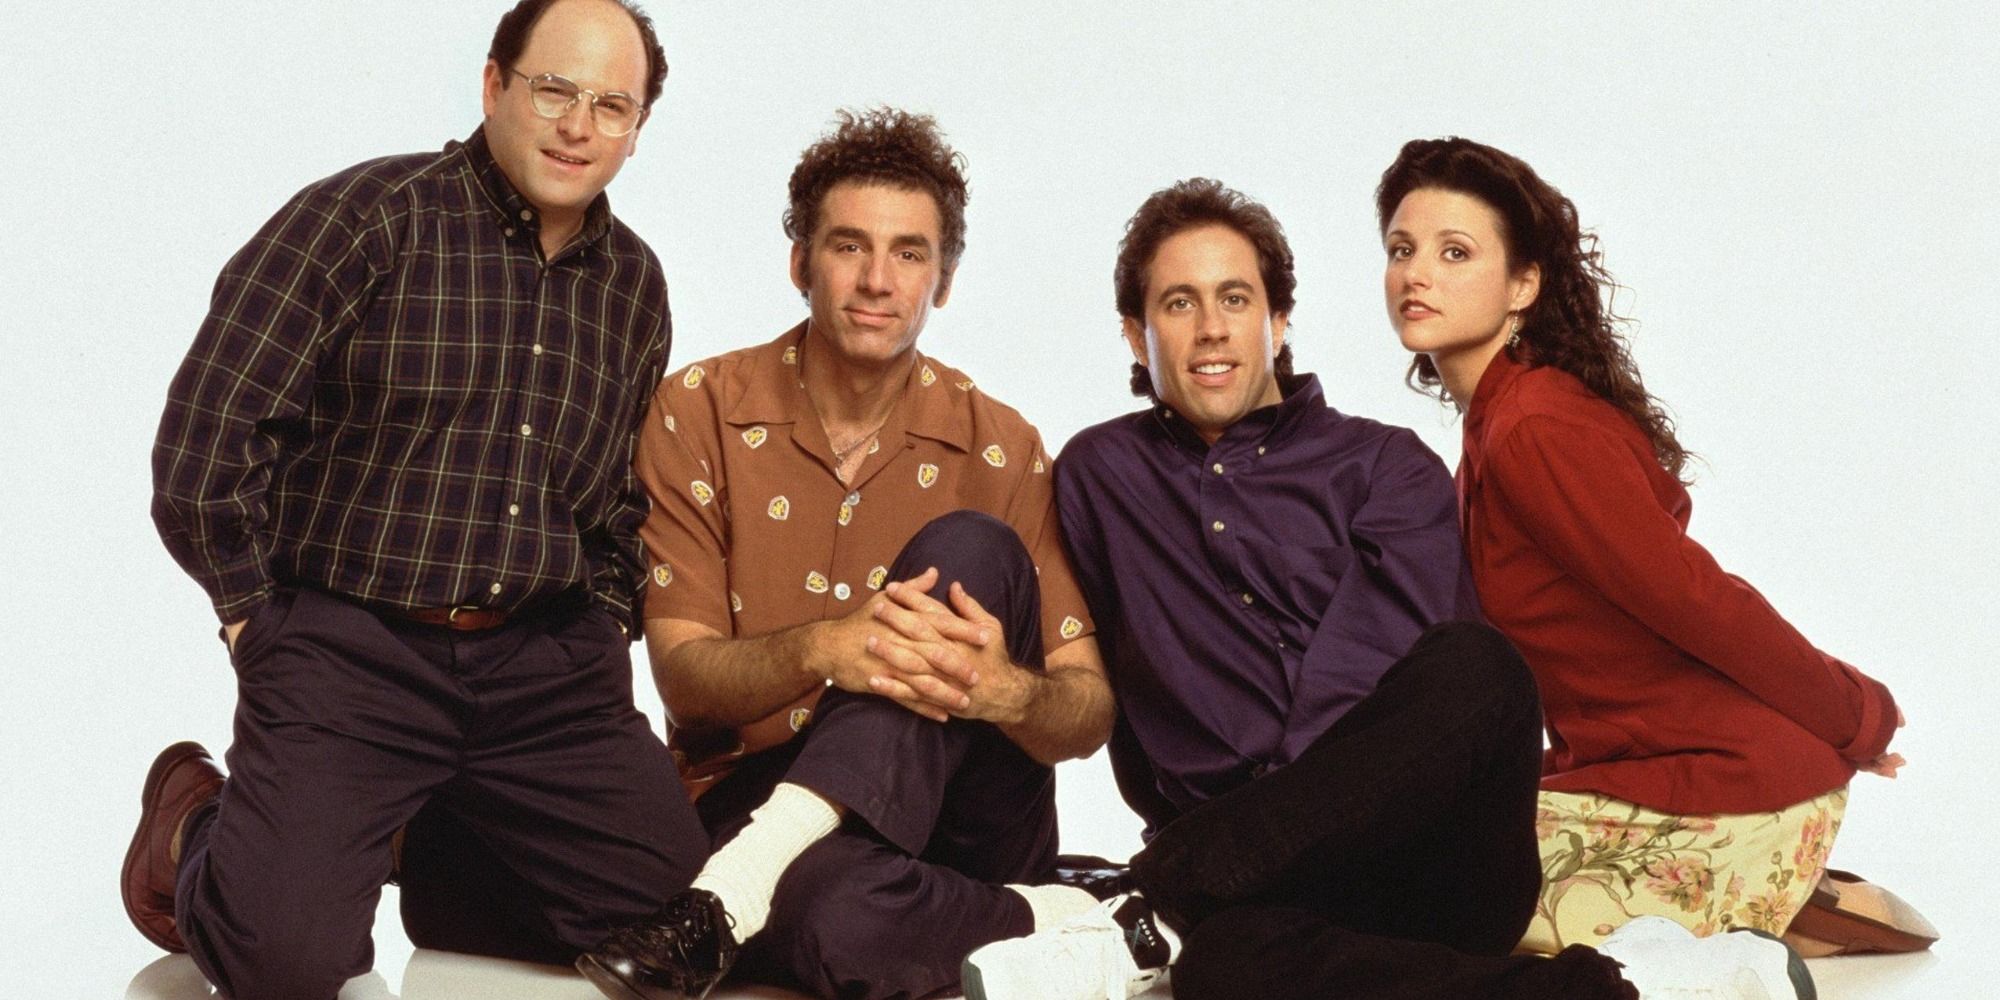 George, Kramer, Jerry, and Elaine in Seinfeld.